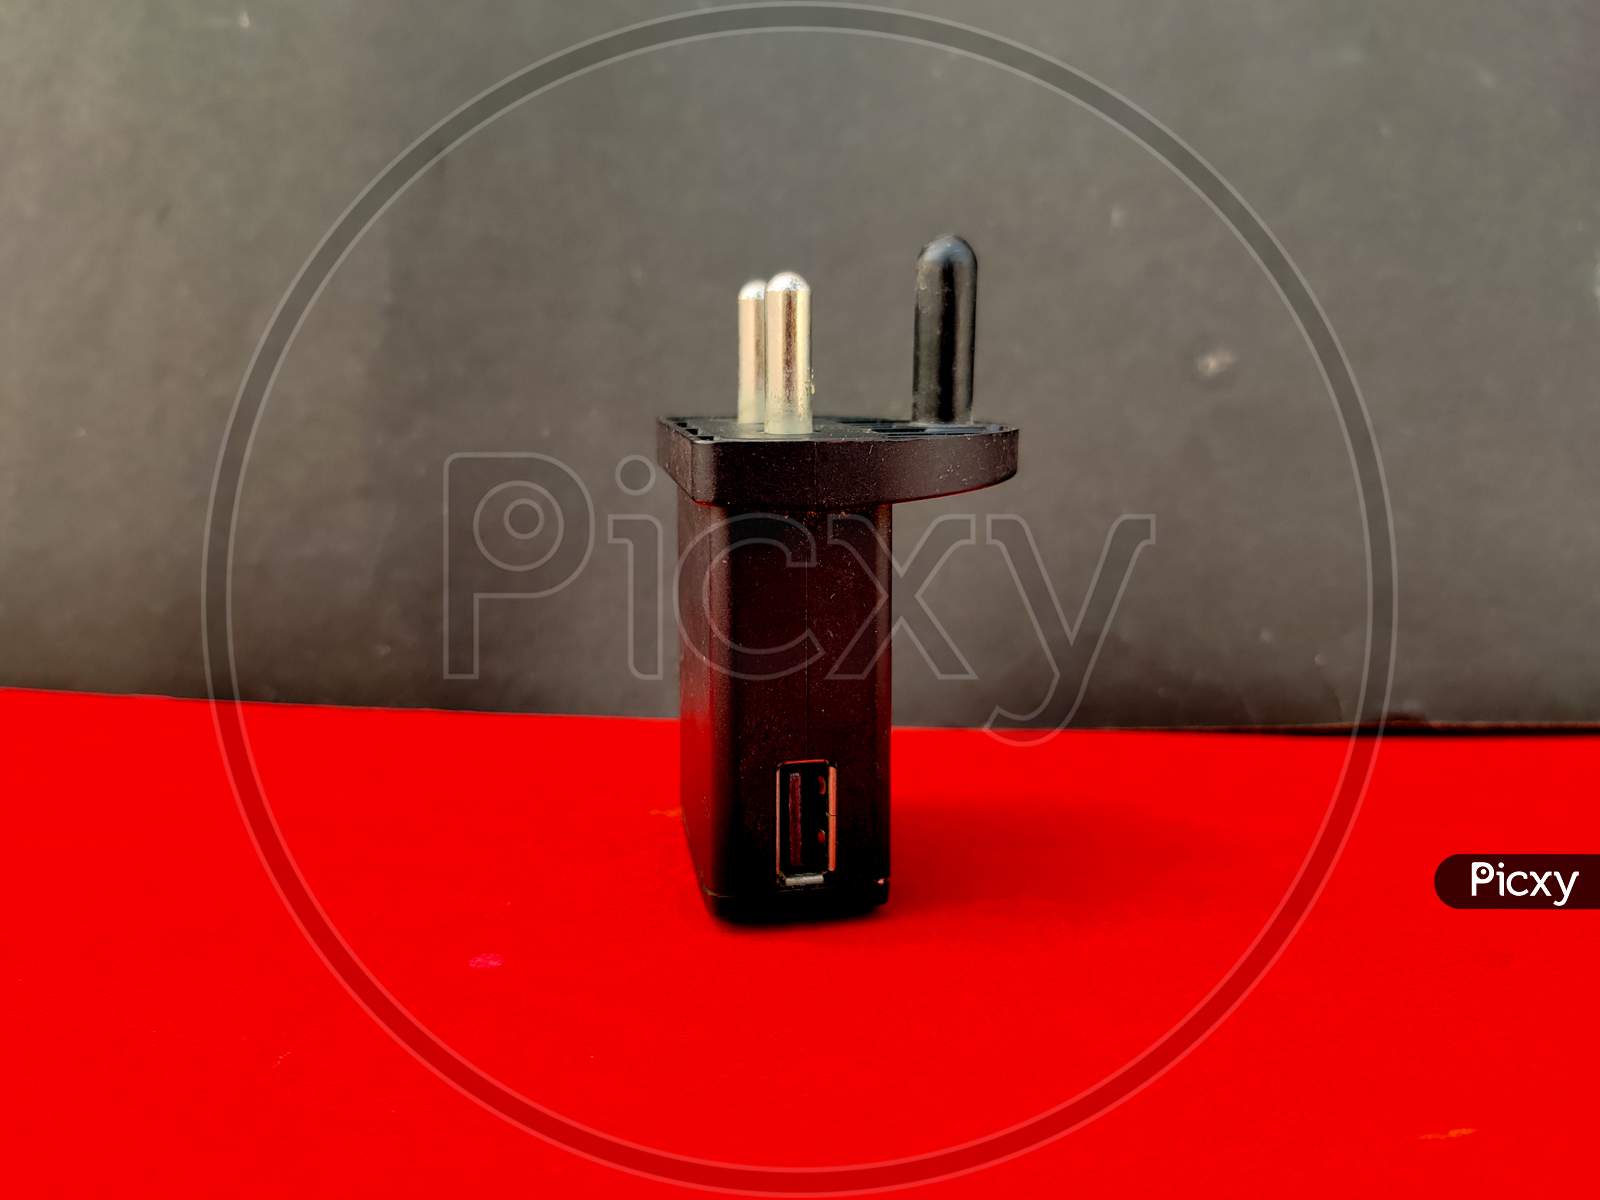 Black Color Usb Phone Charger On Red And Black Background